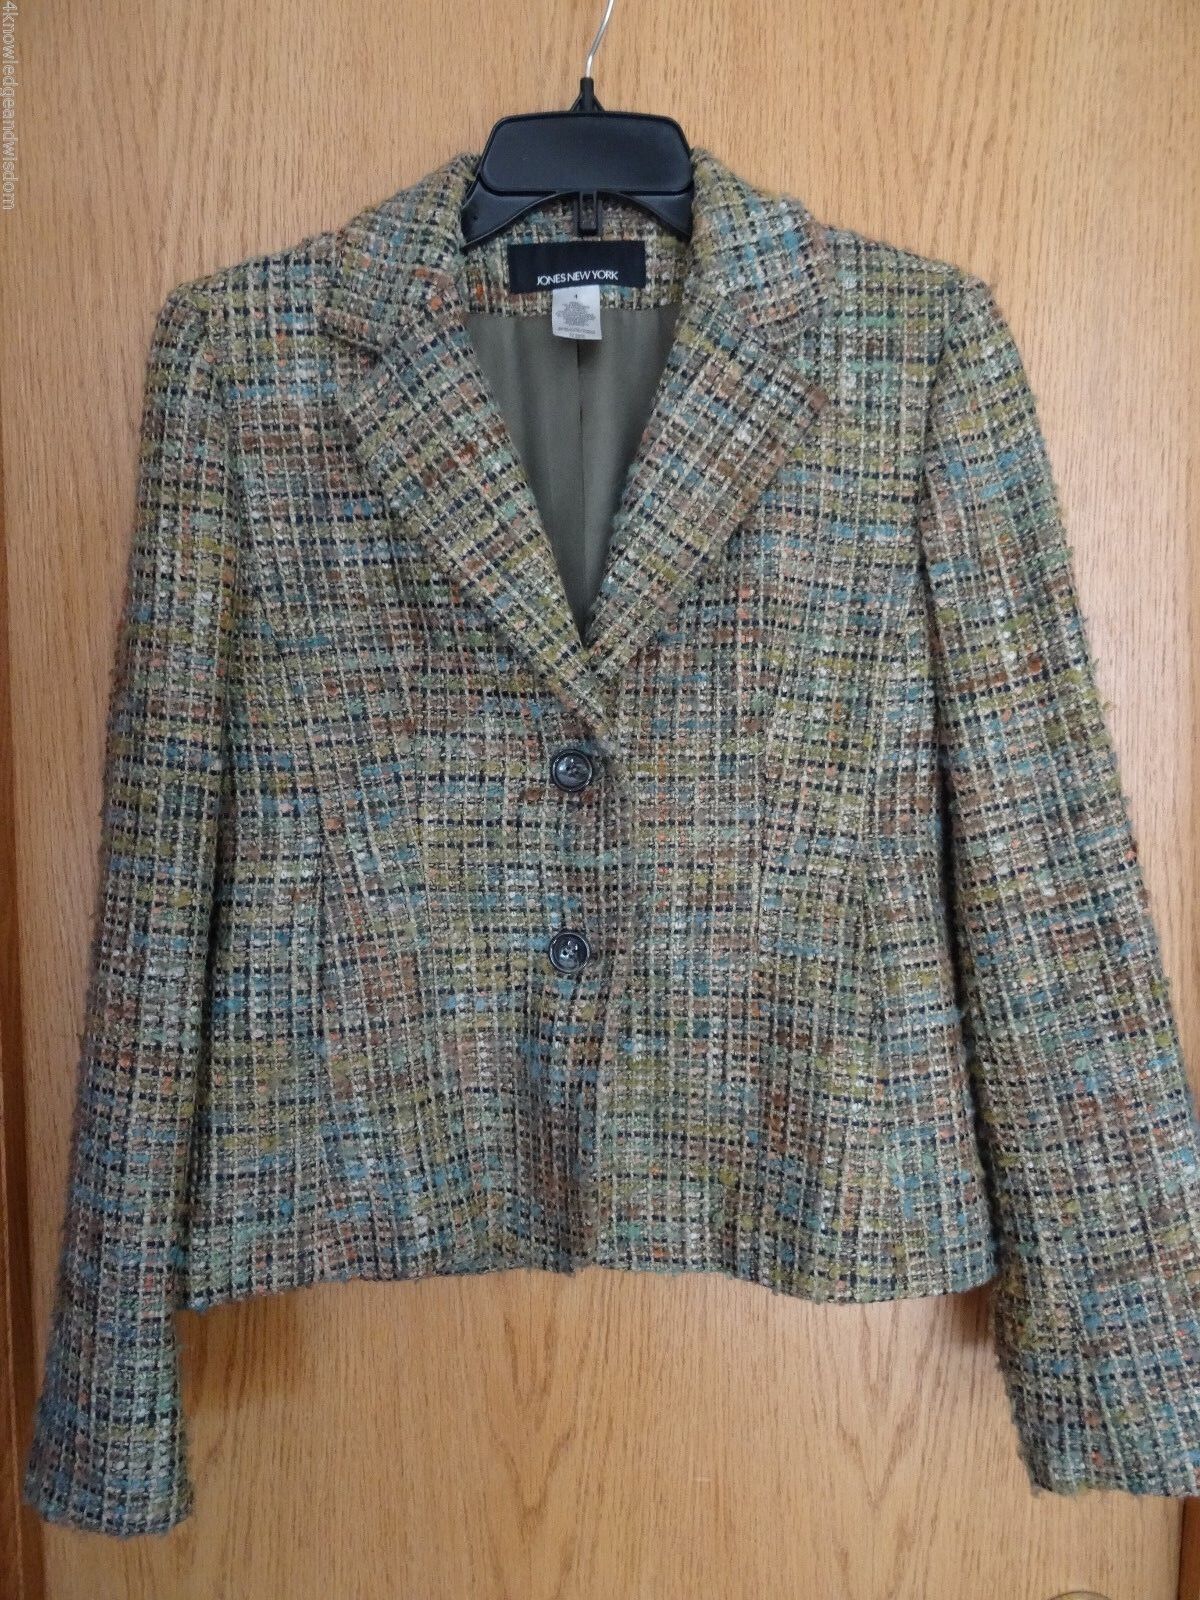 Primary image for JONES NEW YORK 2 Piece Suit Boucle Jacket Womens Size 4 & Skirt Size 8 Vintage